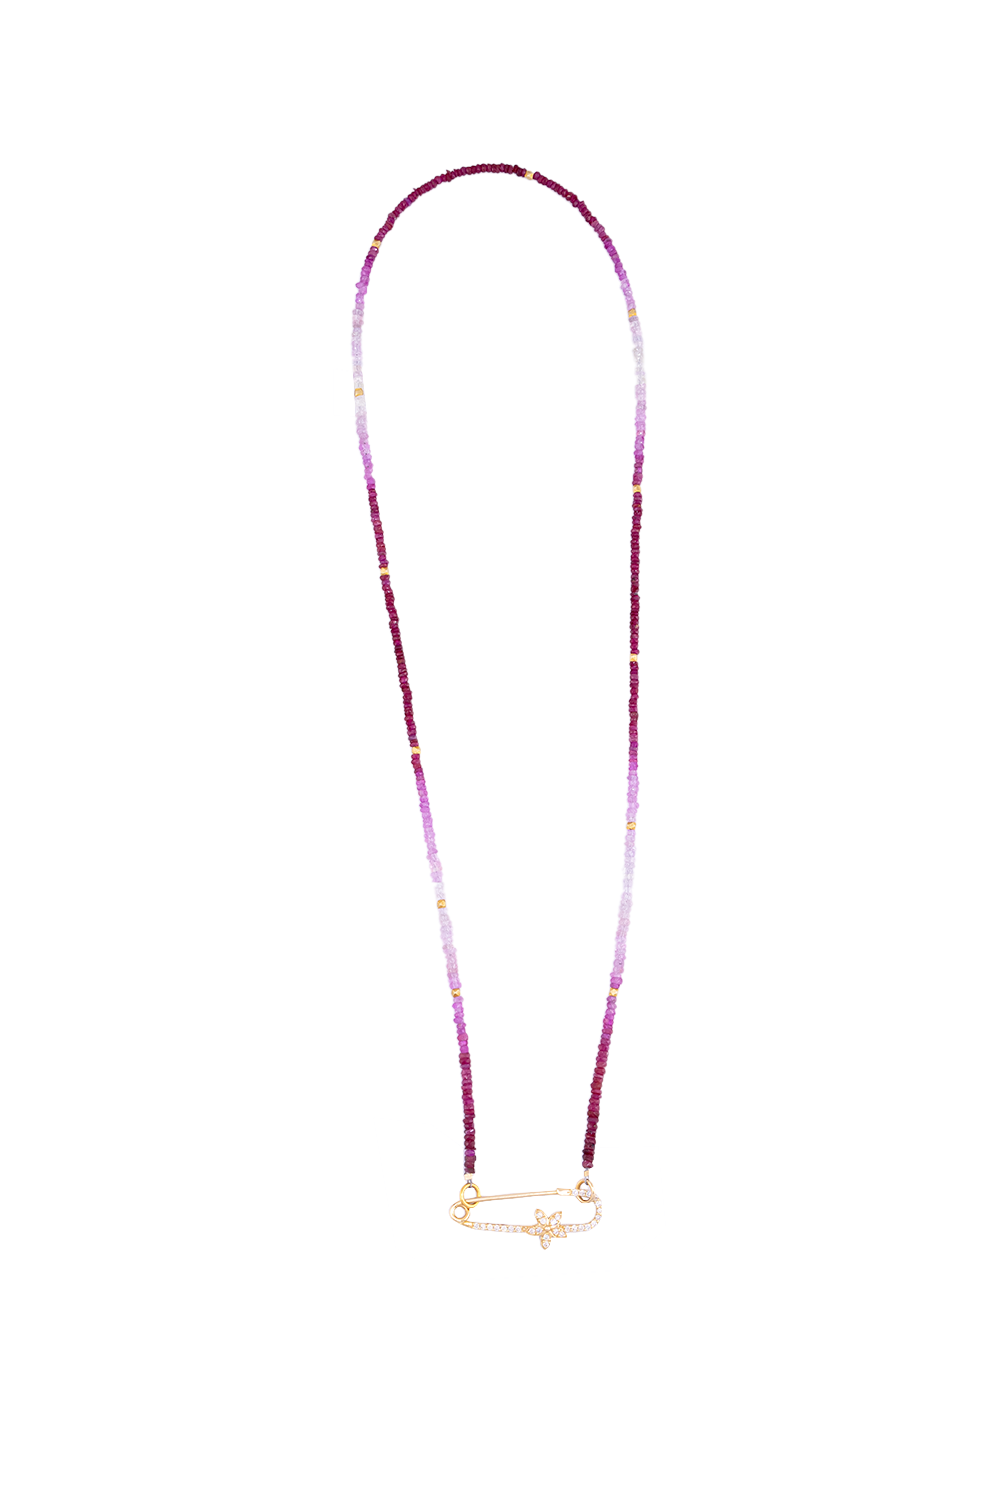 Ombre Rubies, Gold Beads, Diamond Flower Safety Pin Necklace